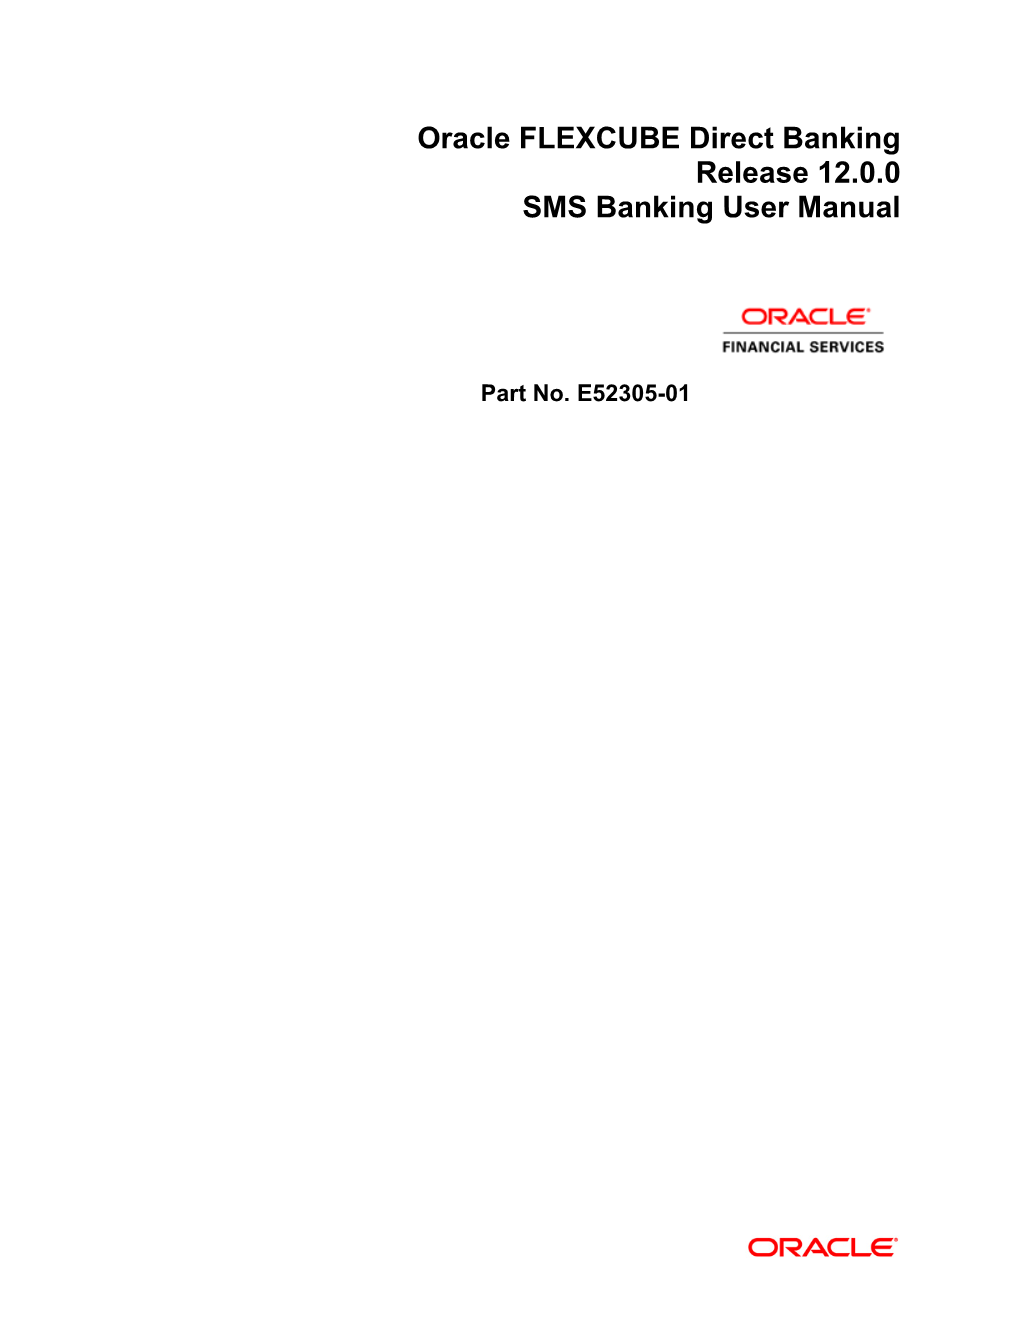 User Manual Oracle FLEXCUBE Direct Banking SMS Banking